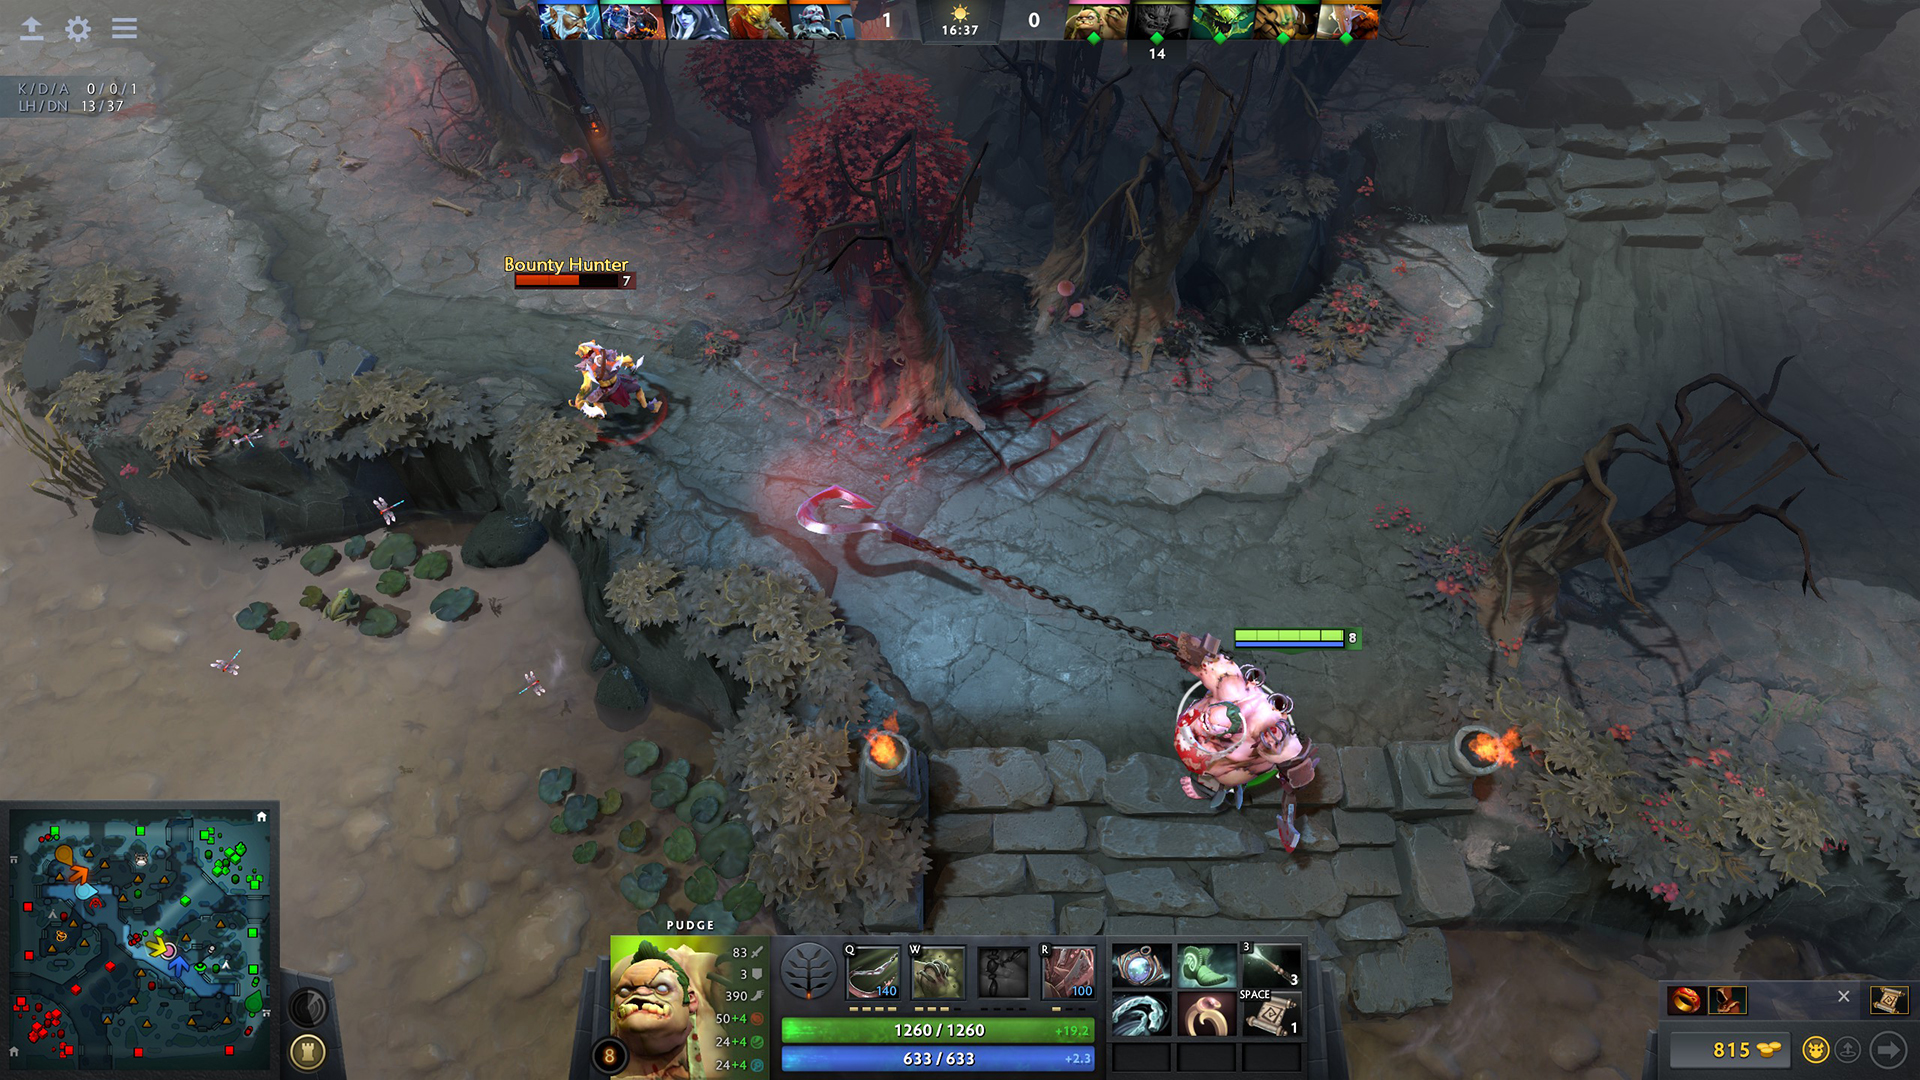 Dota 2 on X: You can pre-load FREE TO PLAY in order to